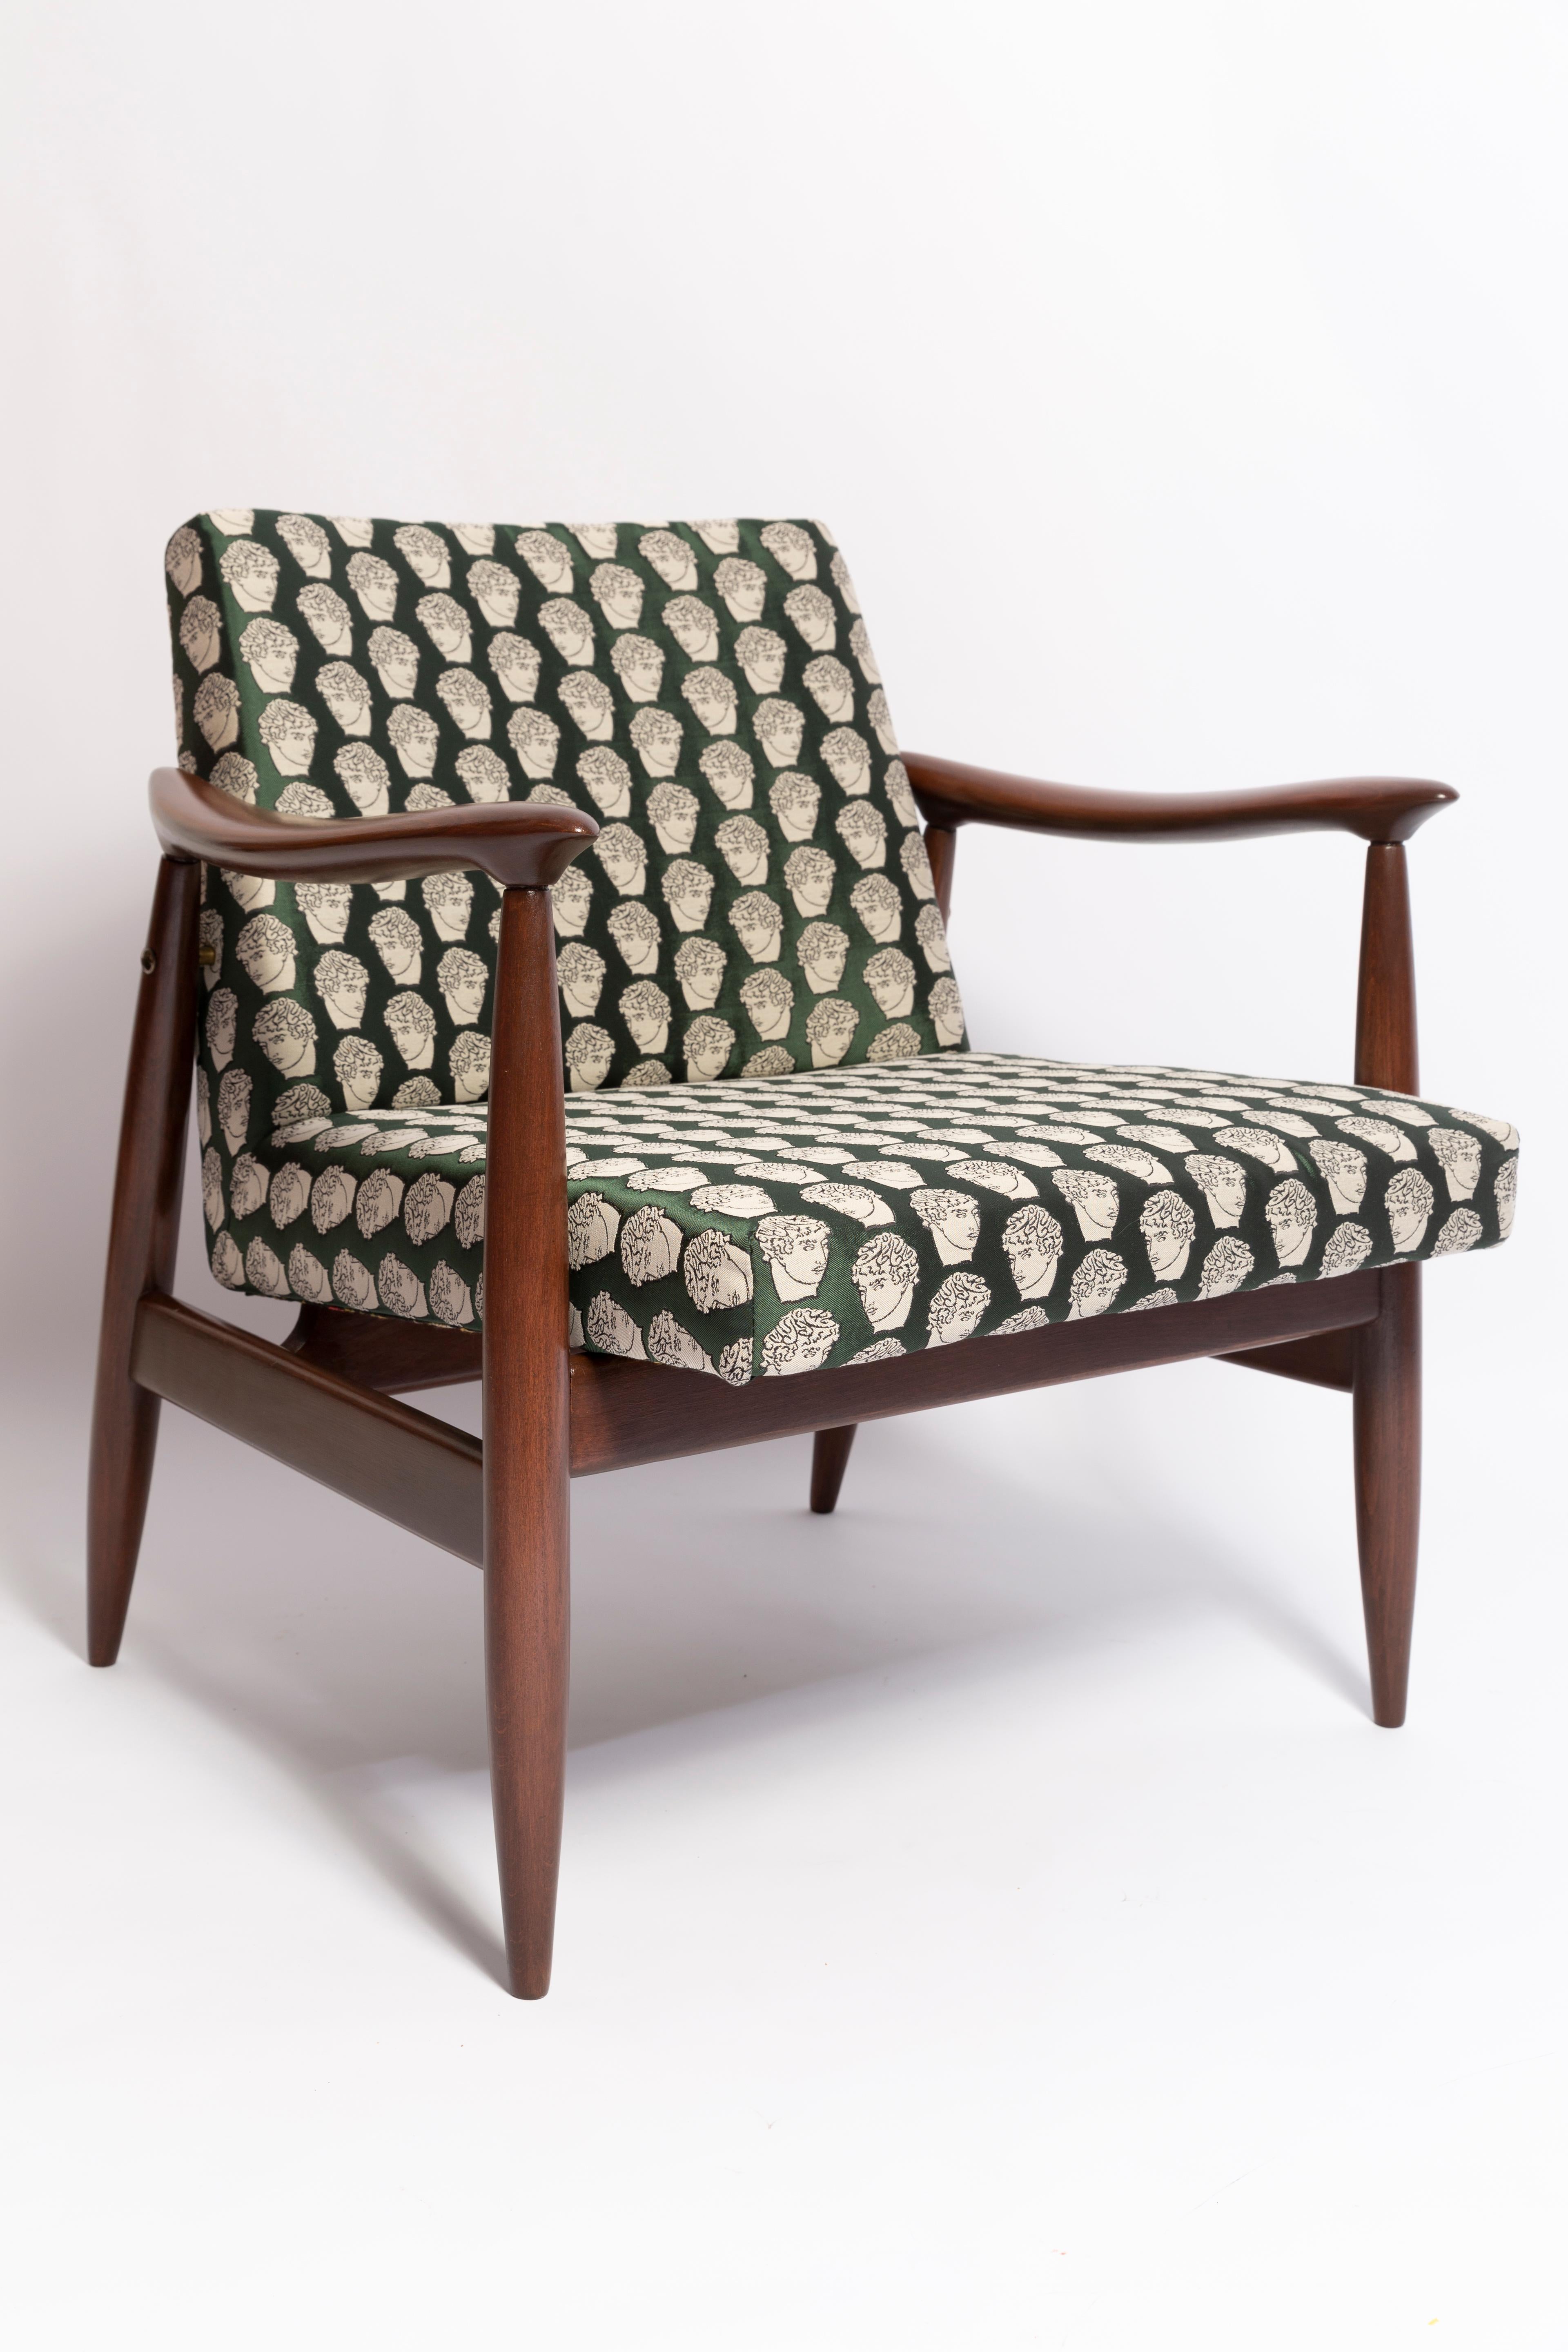 Hand-Crafted Pair of Midcentury David Print Emerald Armchairs, by Kedziorek, Europe, 1960s For Sale